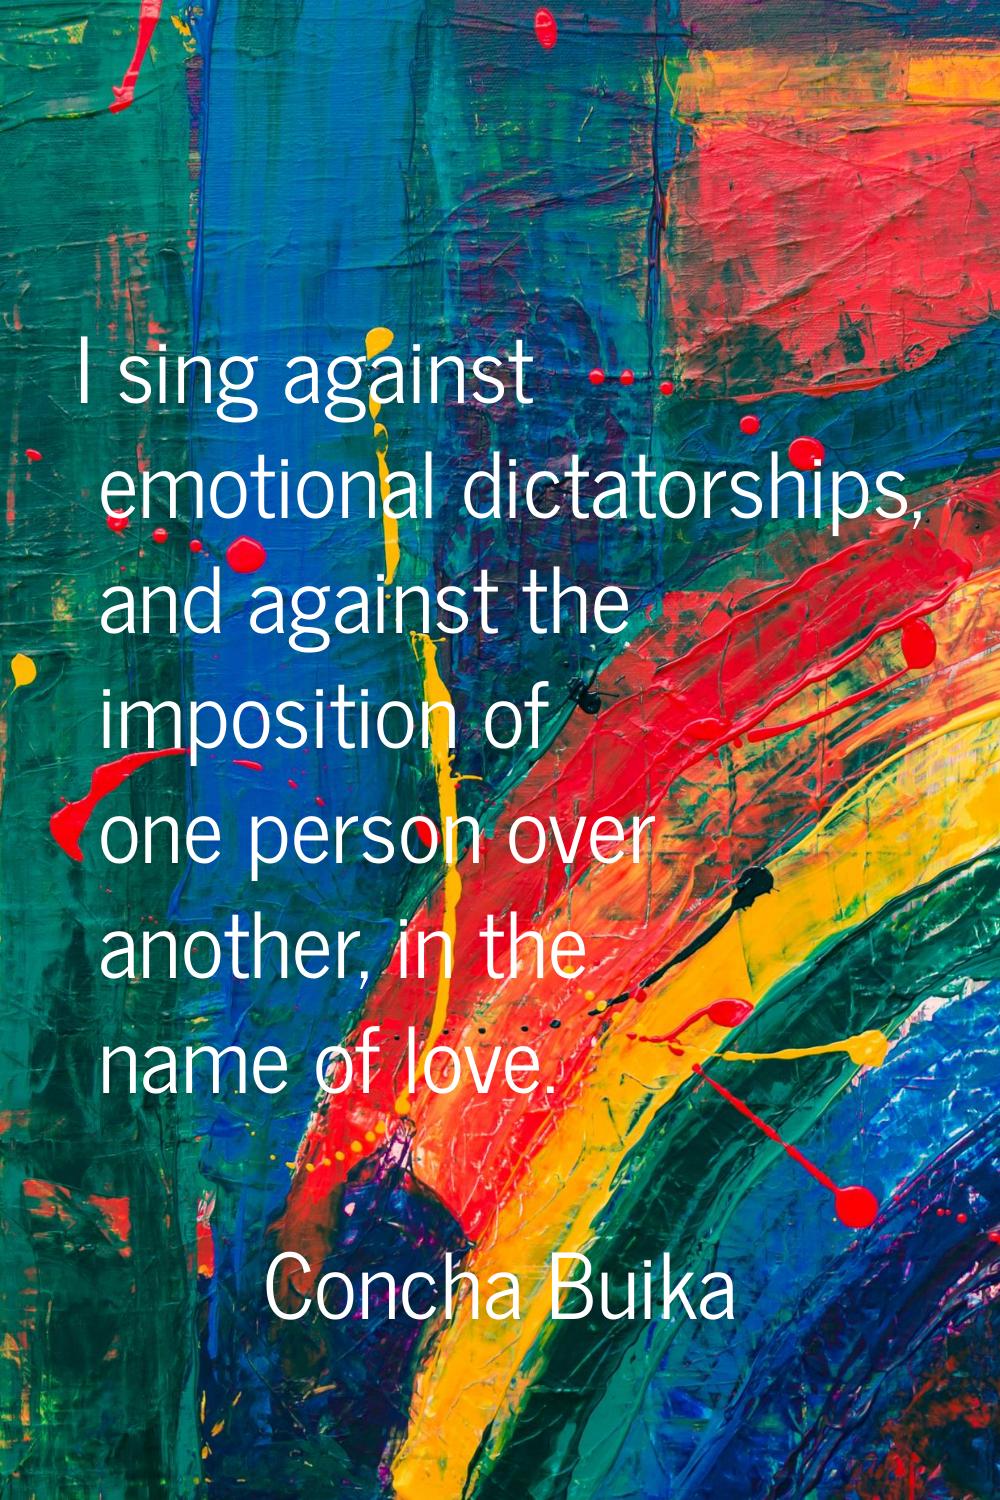 I sing against emotional dictatorships, and against the imposition of one person over another, in t